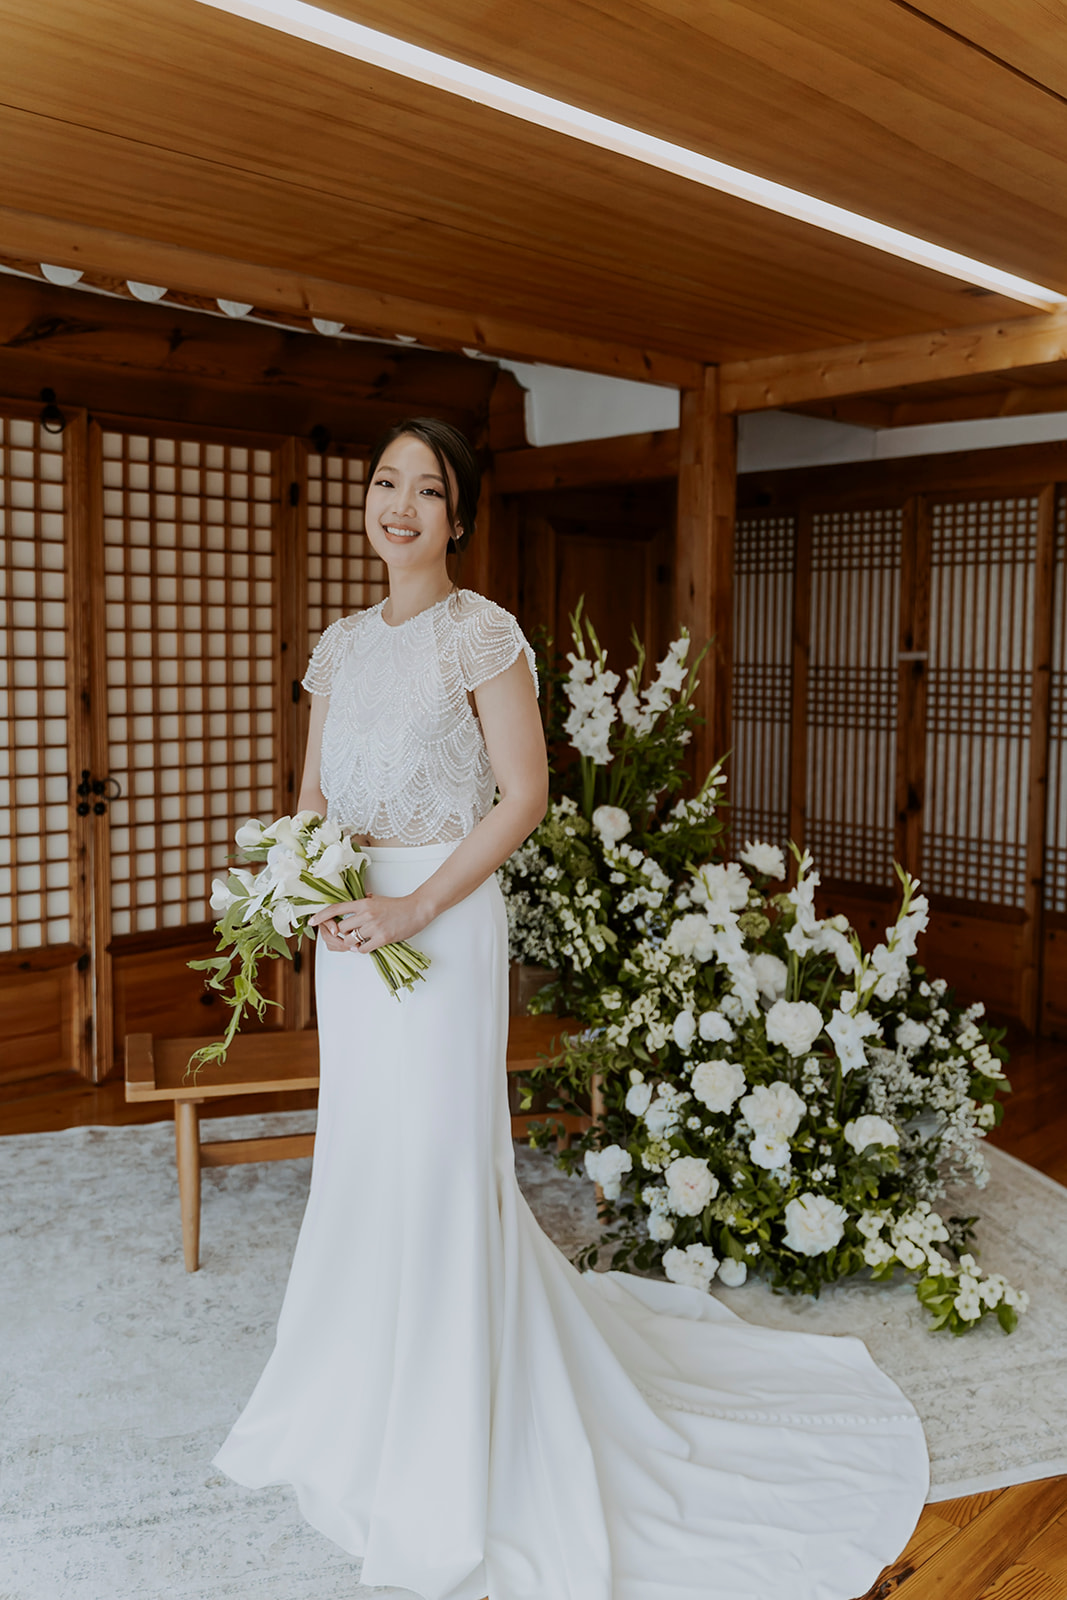 A bride in a white wedding dress standing in a wooden room.